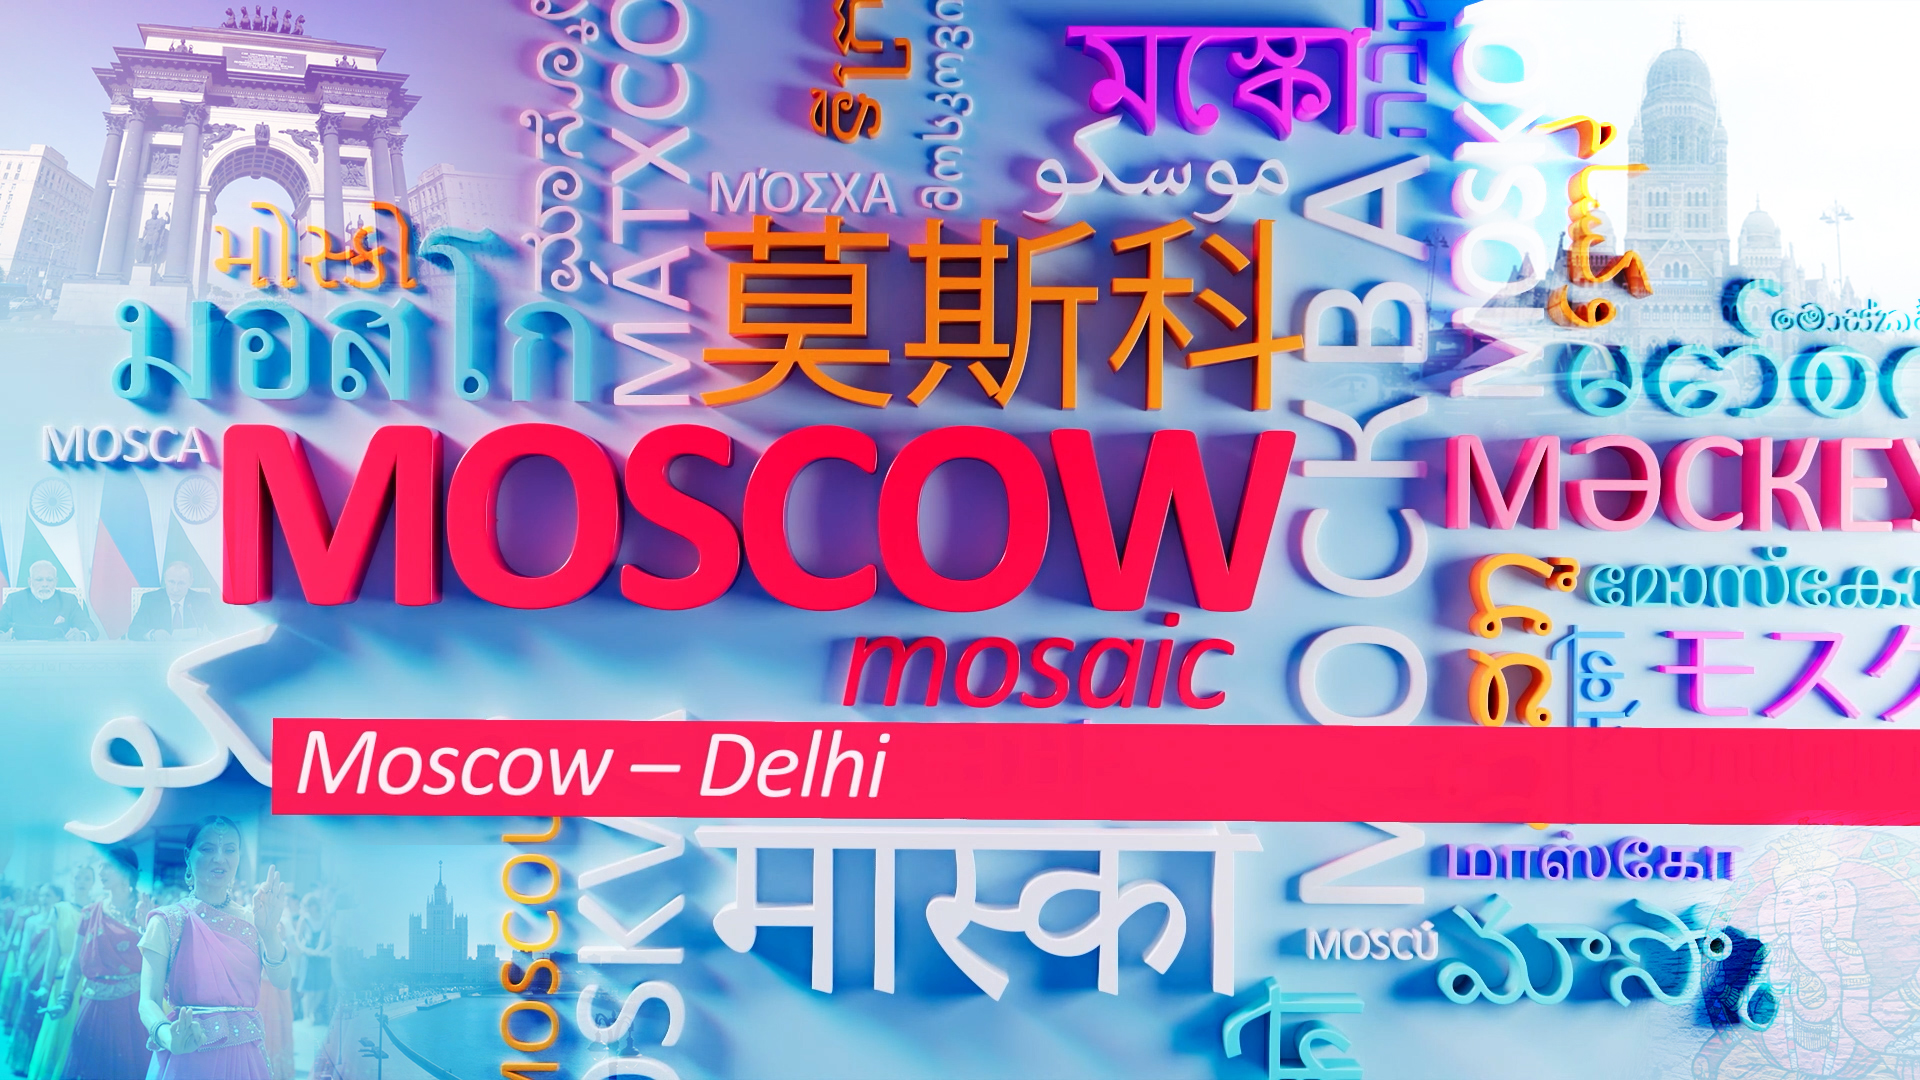 "Moscow Mosaic" - The friendship and cooperation between Moscow and Delhi